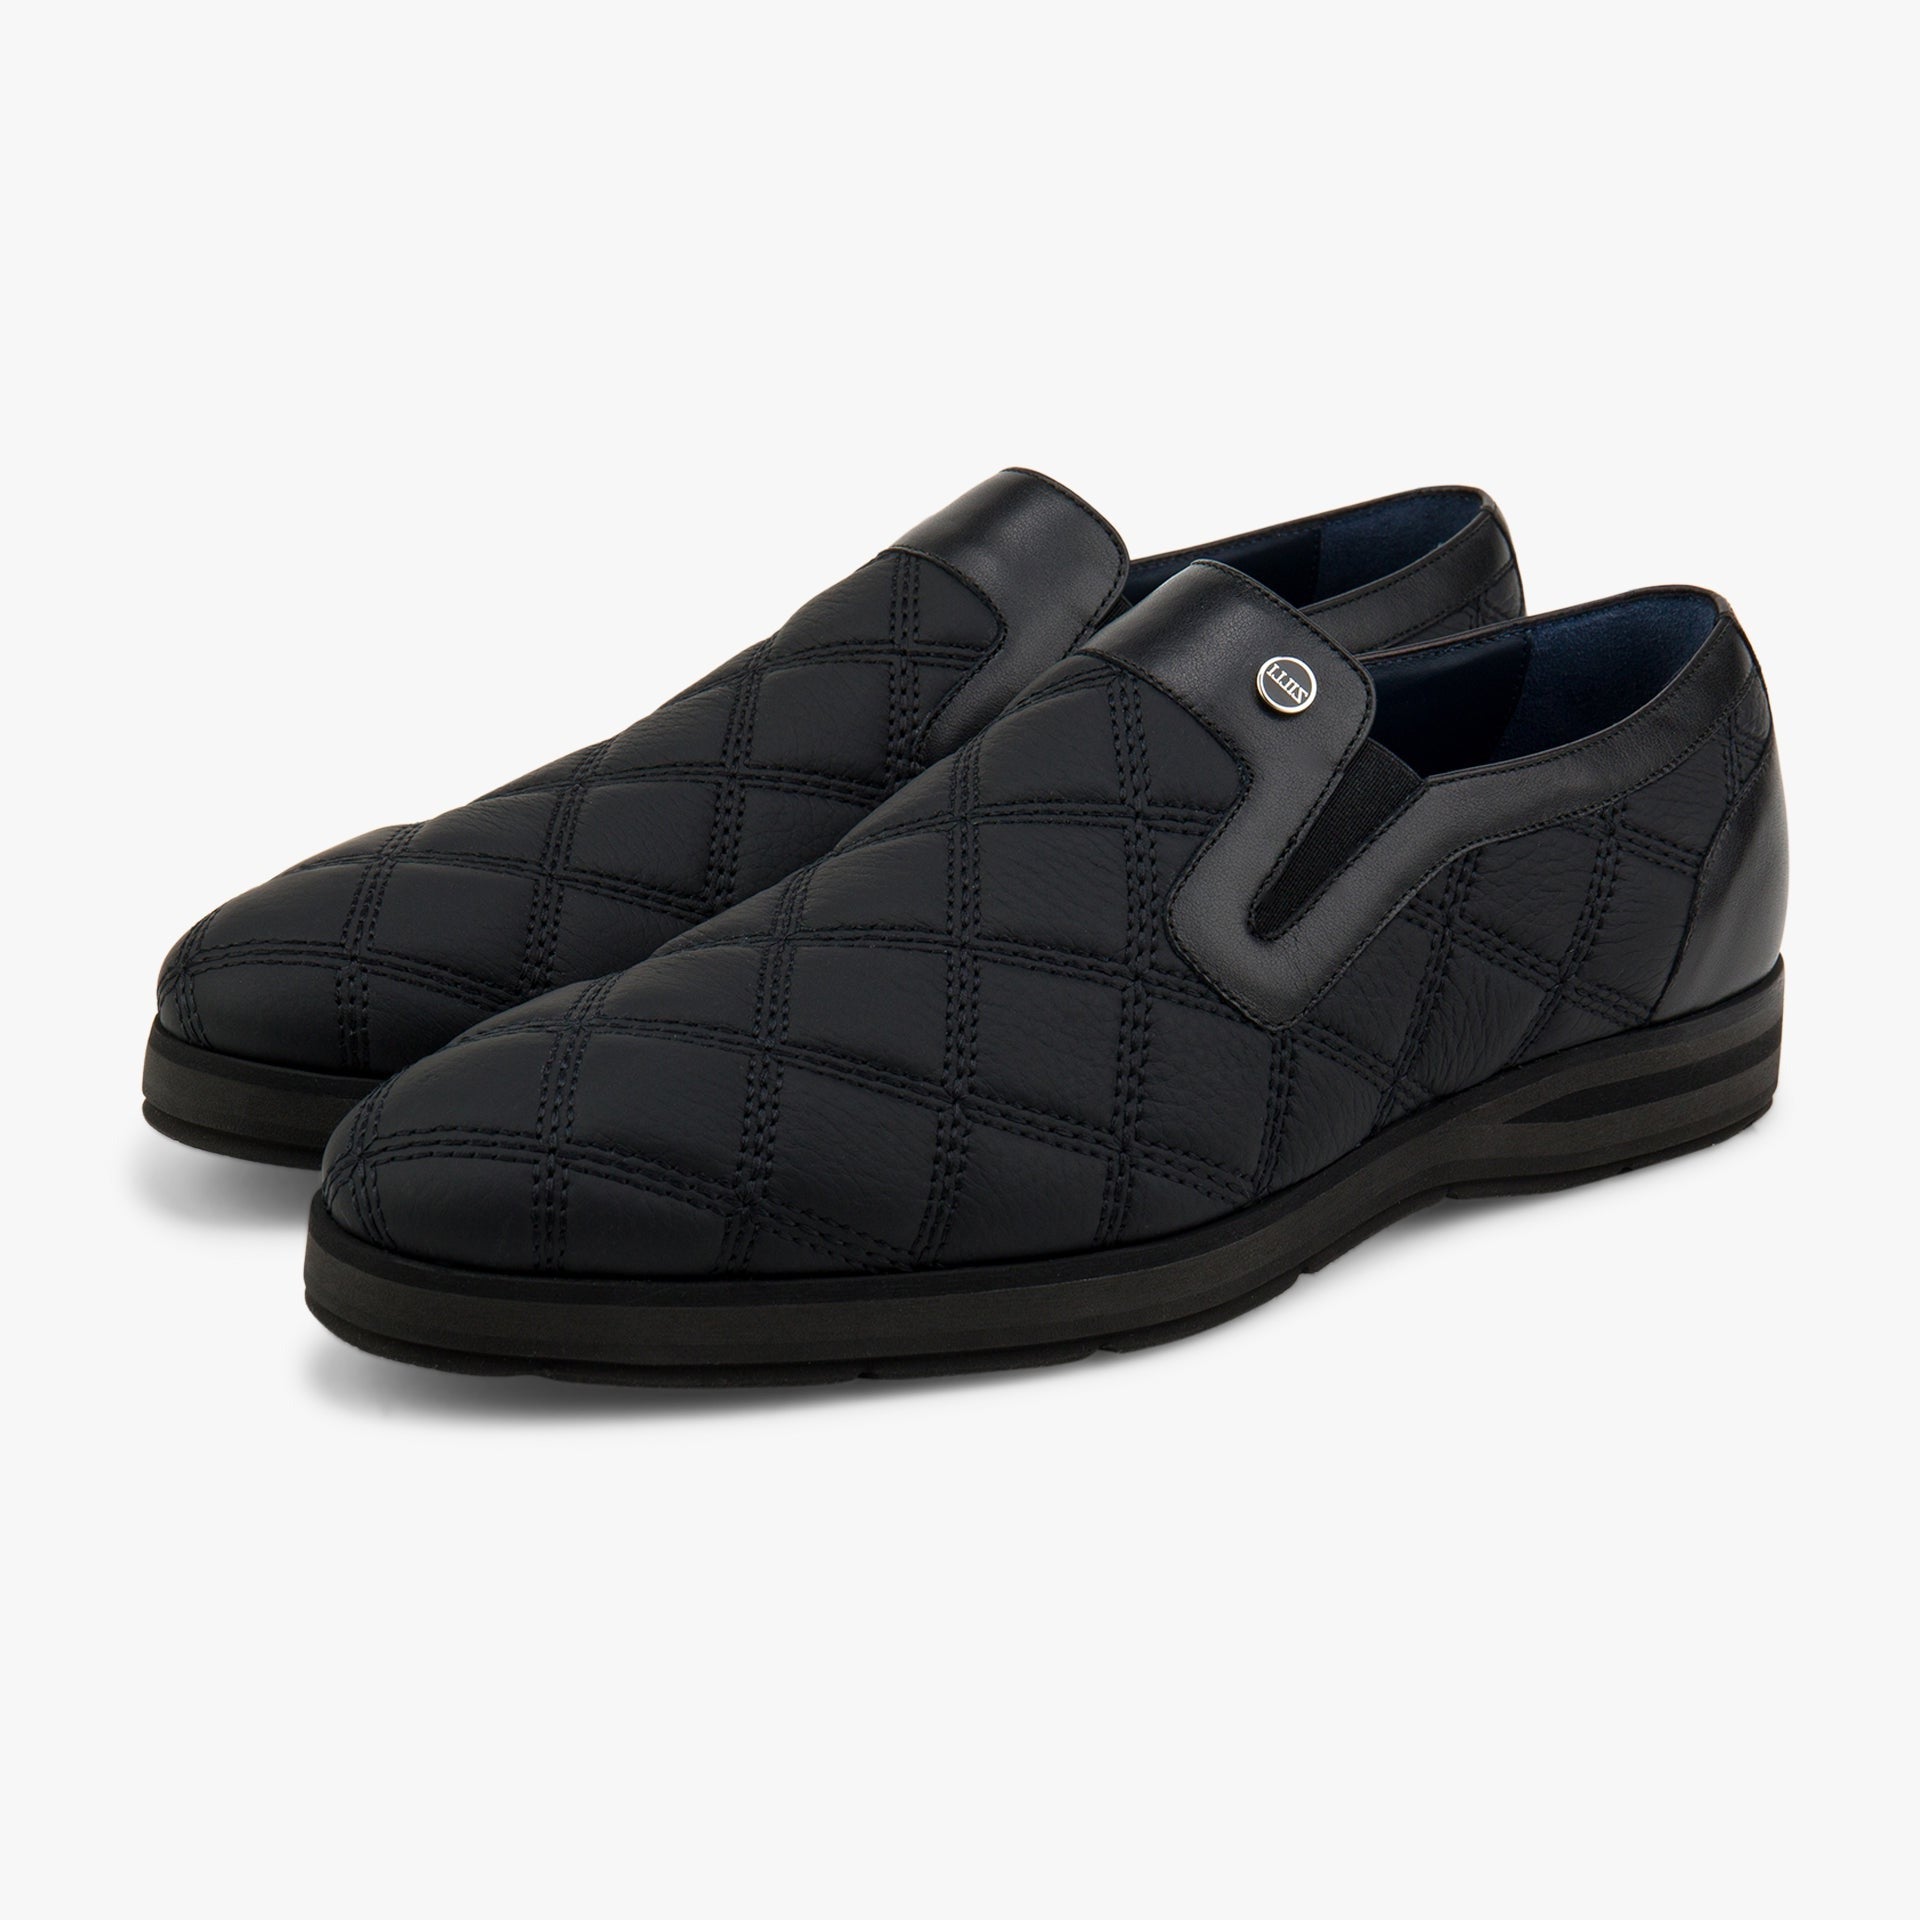 Zilli Pompei Calf Leather Slip-Ons with Boston Quilting